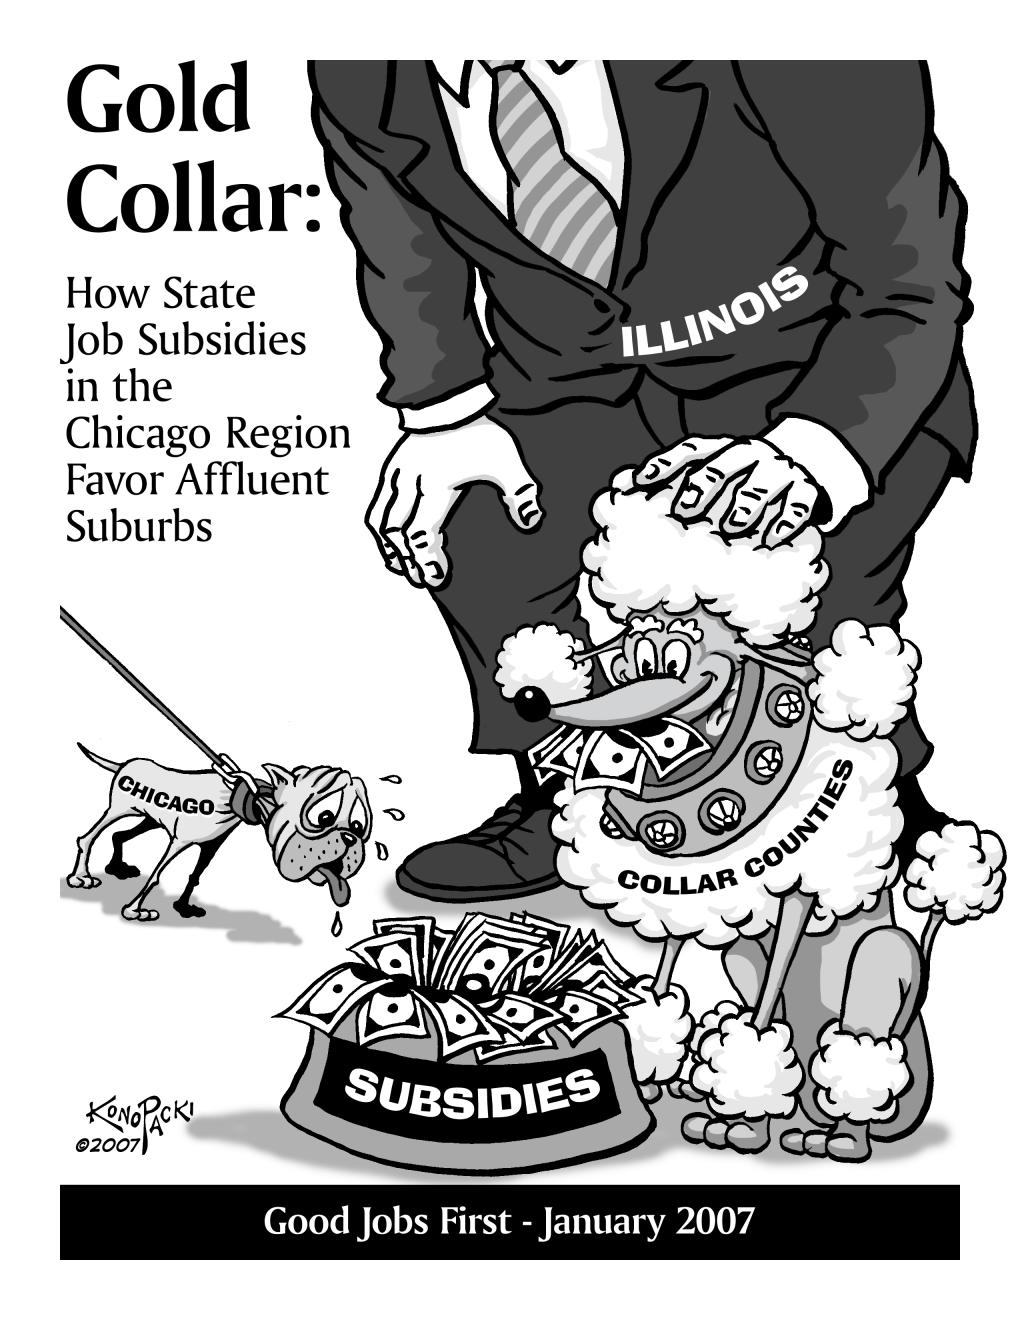 Gold Collar: How State Job Subsidies in the Chicago Region Favor Affluent Suburbs